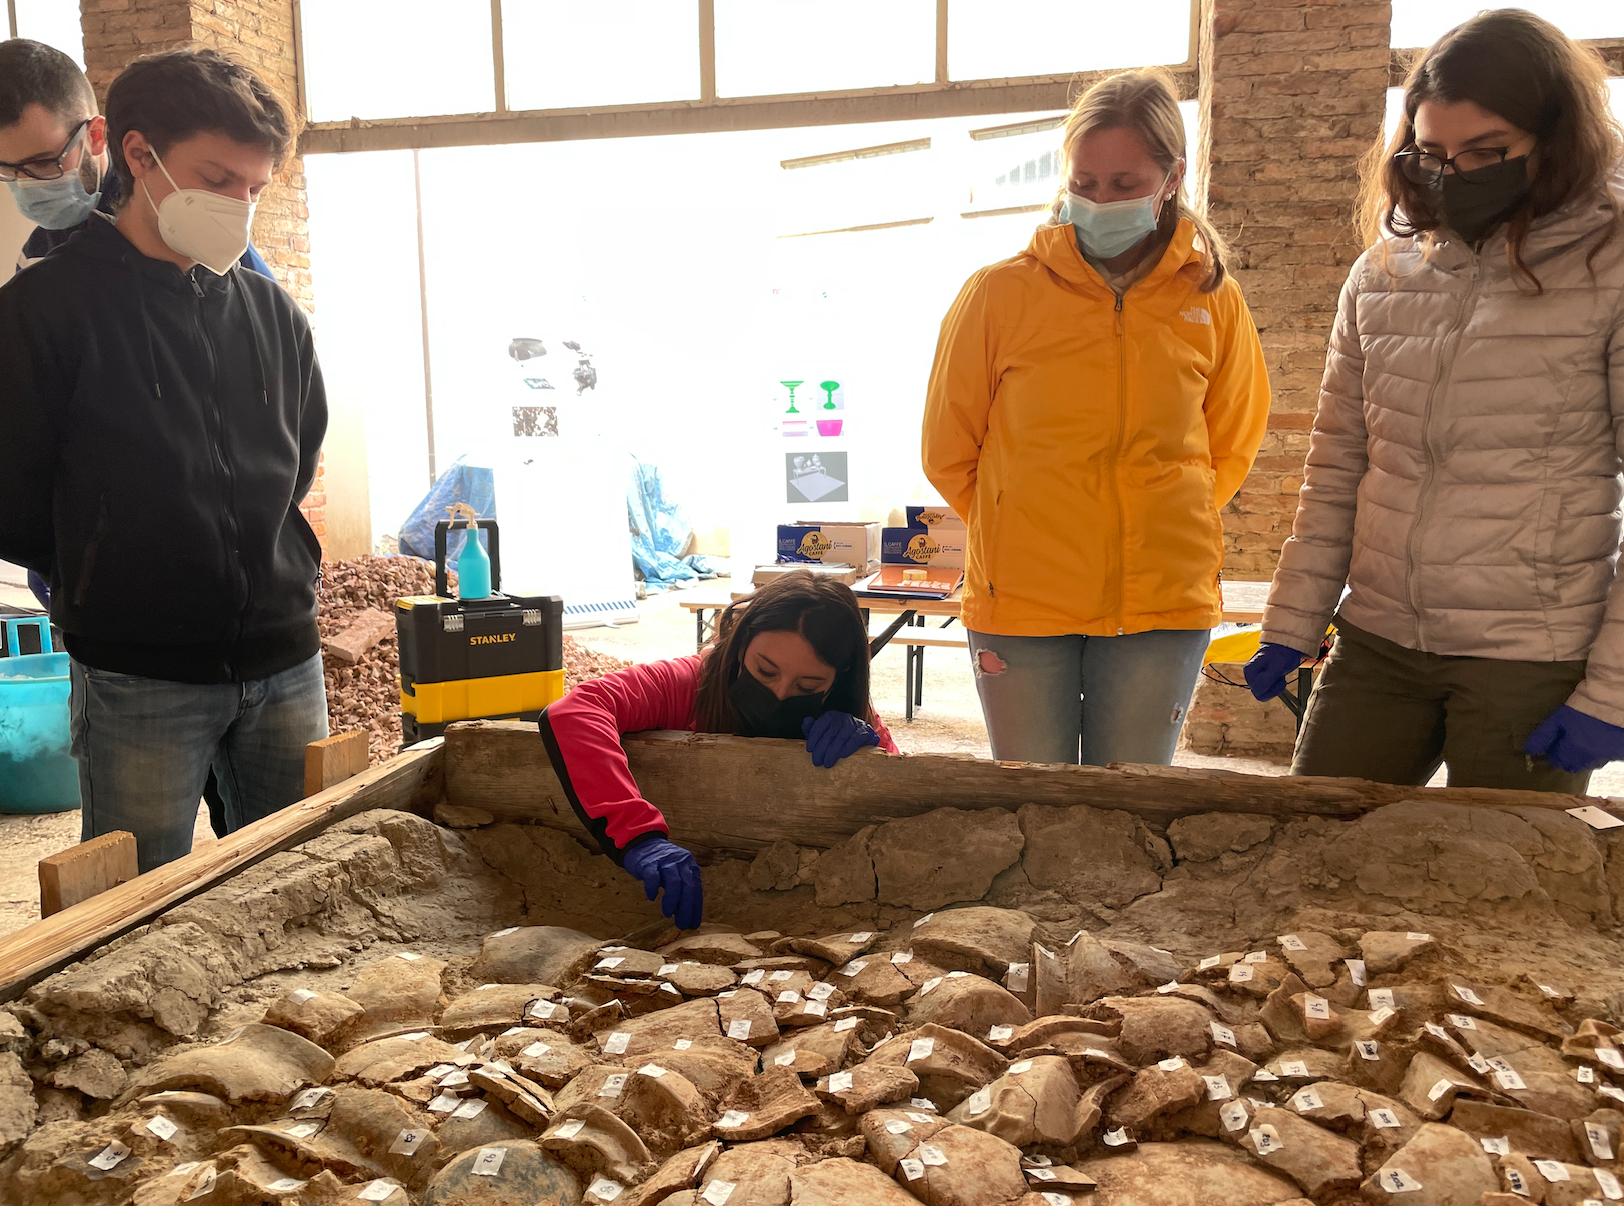 Oldest foundry in Padua excavated 20 years after discovery